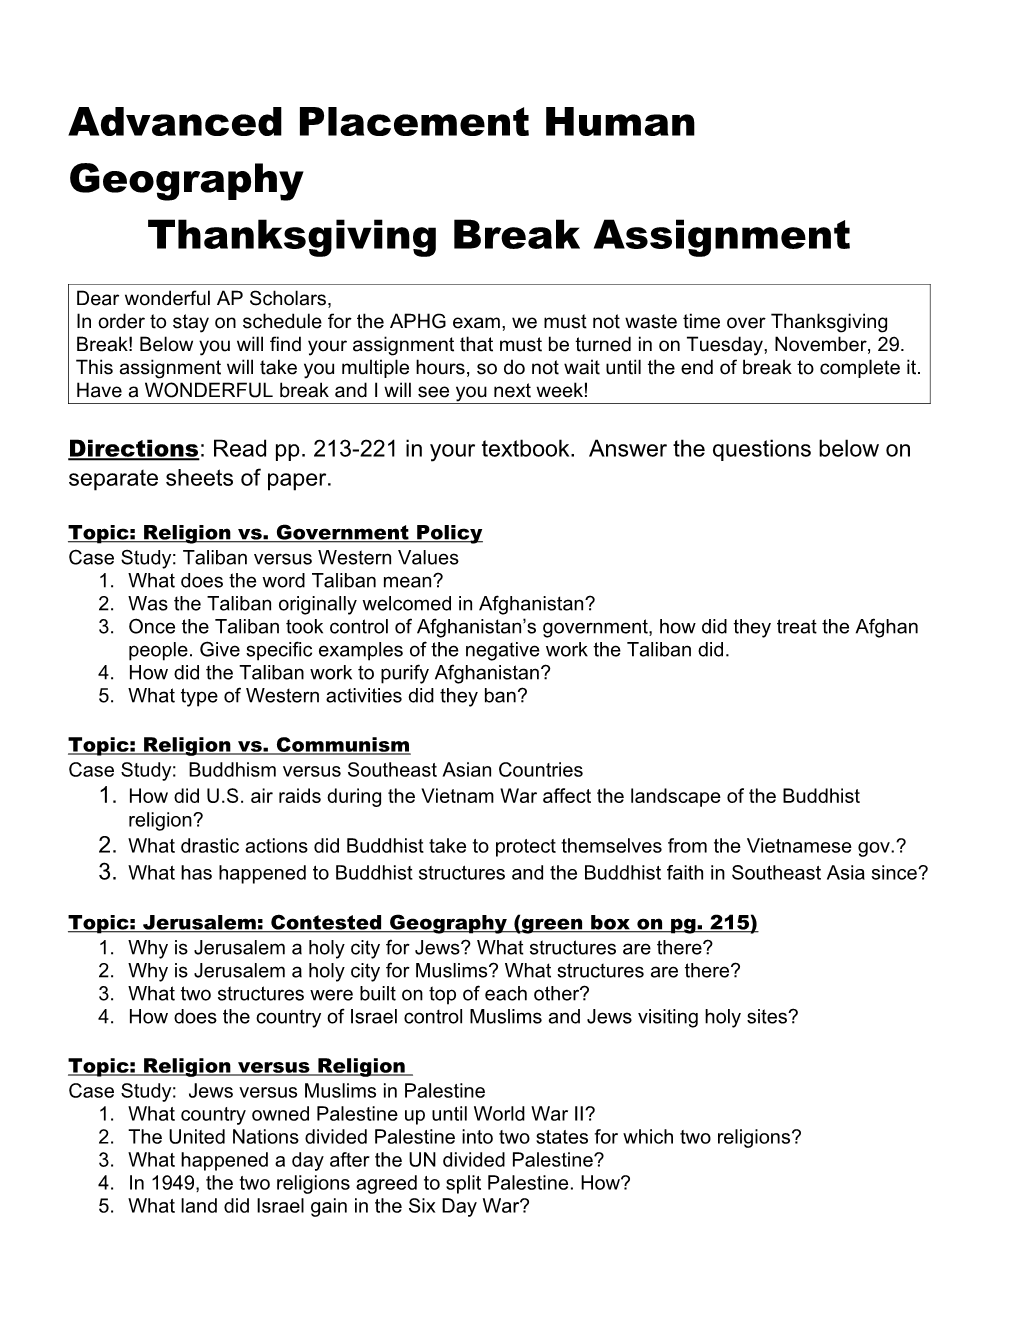 Advanced Placement Human Geography s3